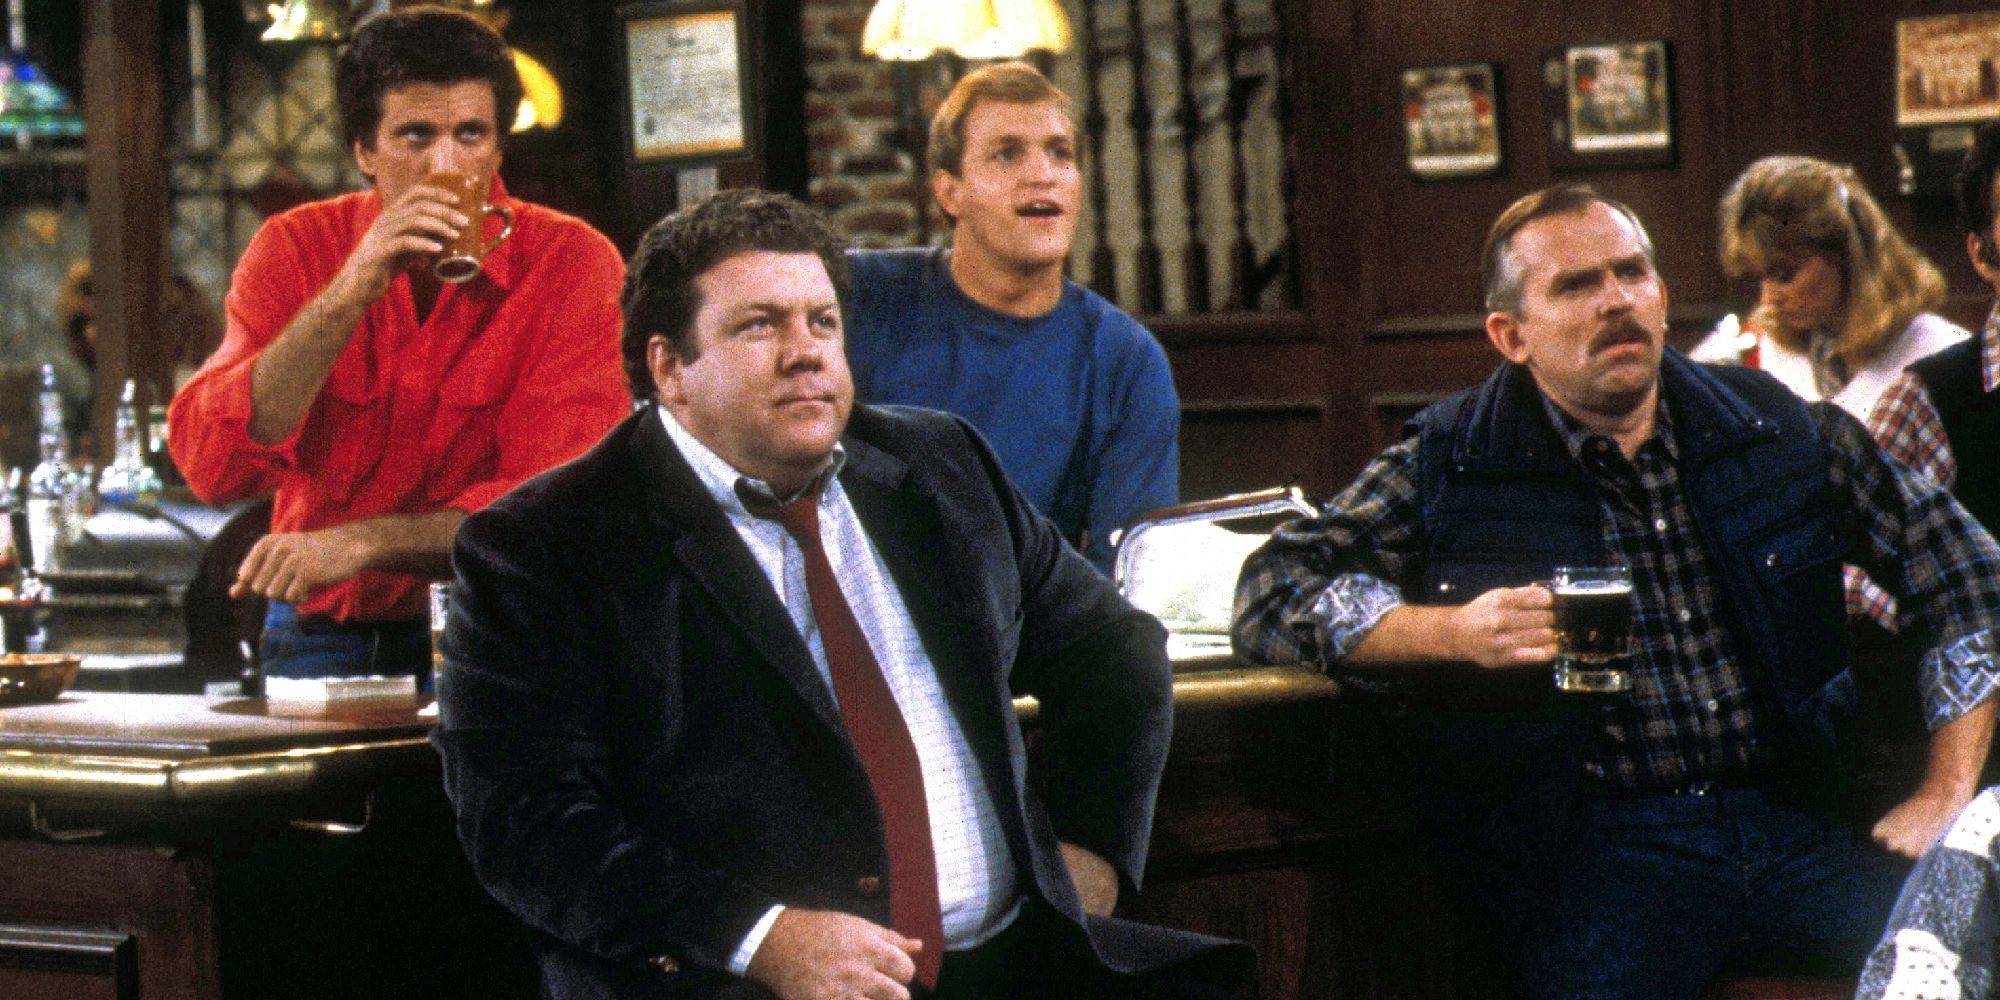 Woody Harrelson, Ted Danson, John Ratzenberger and George Wendt in Cheers